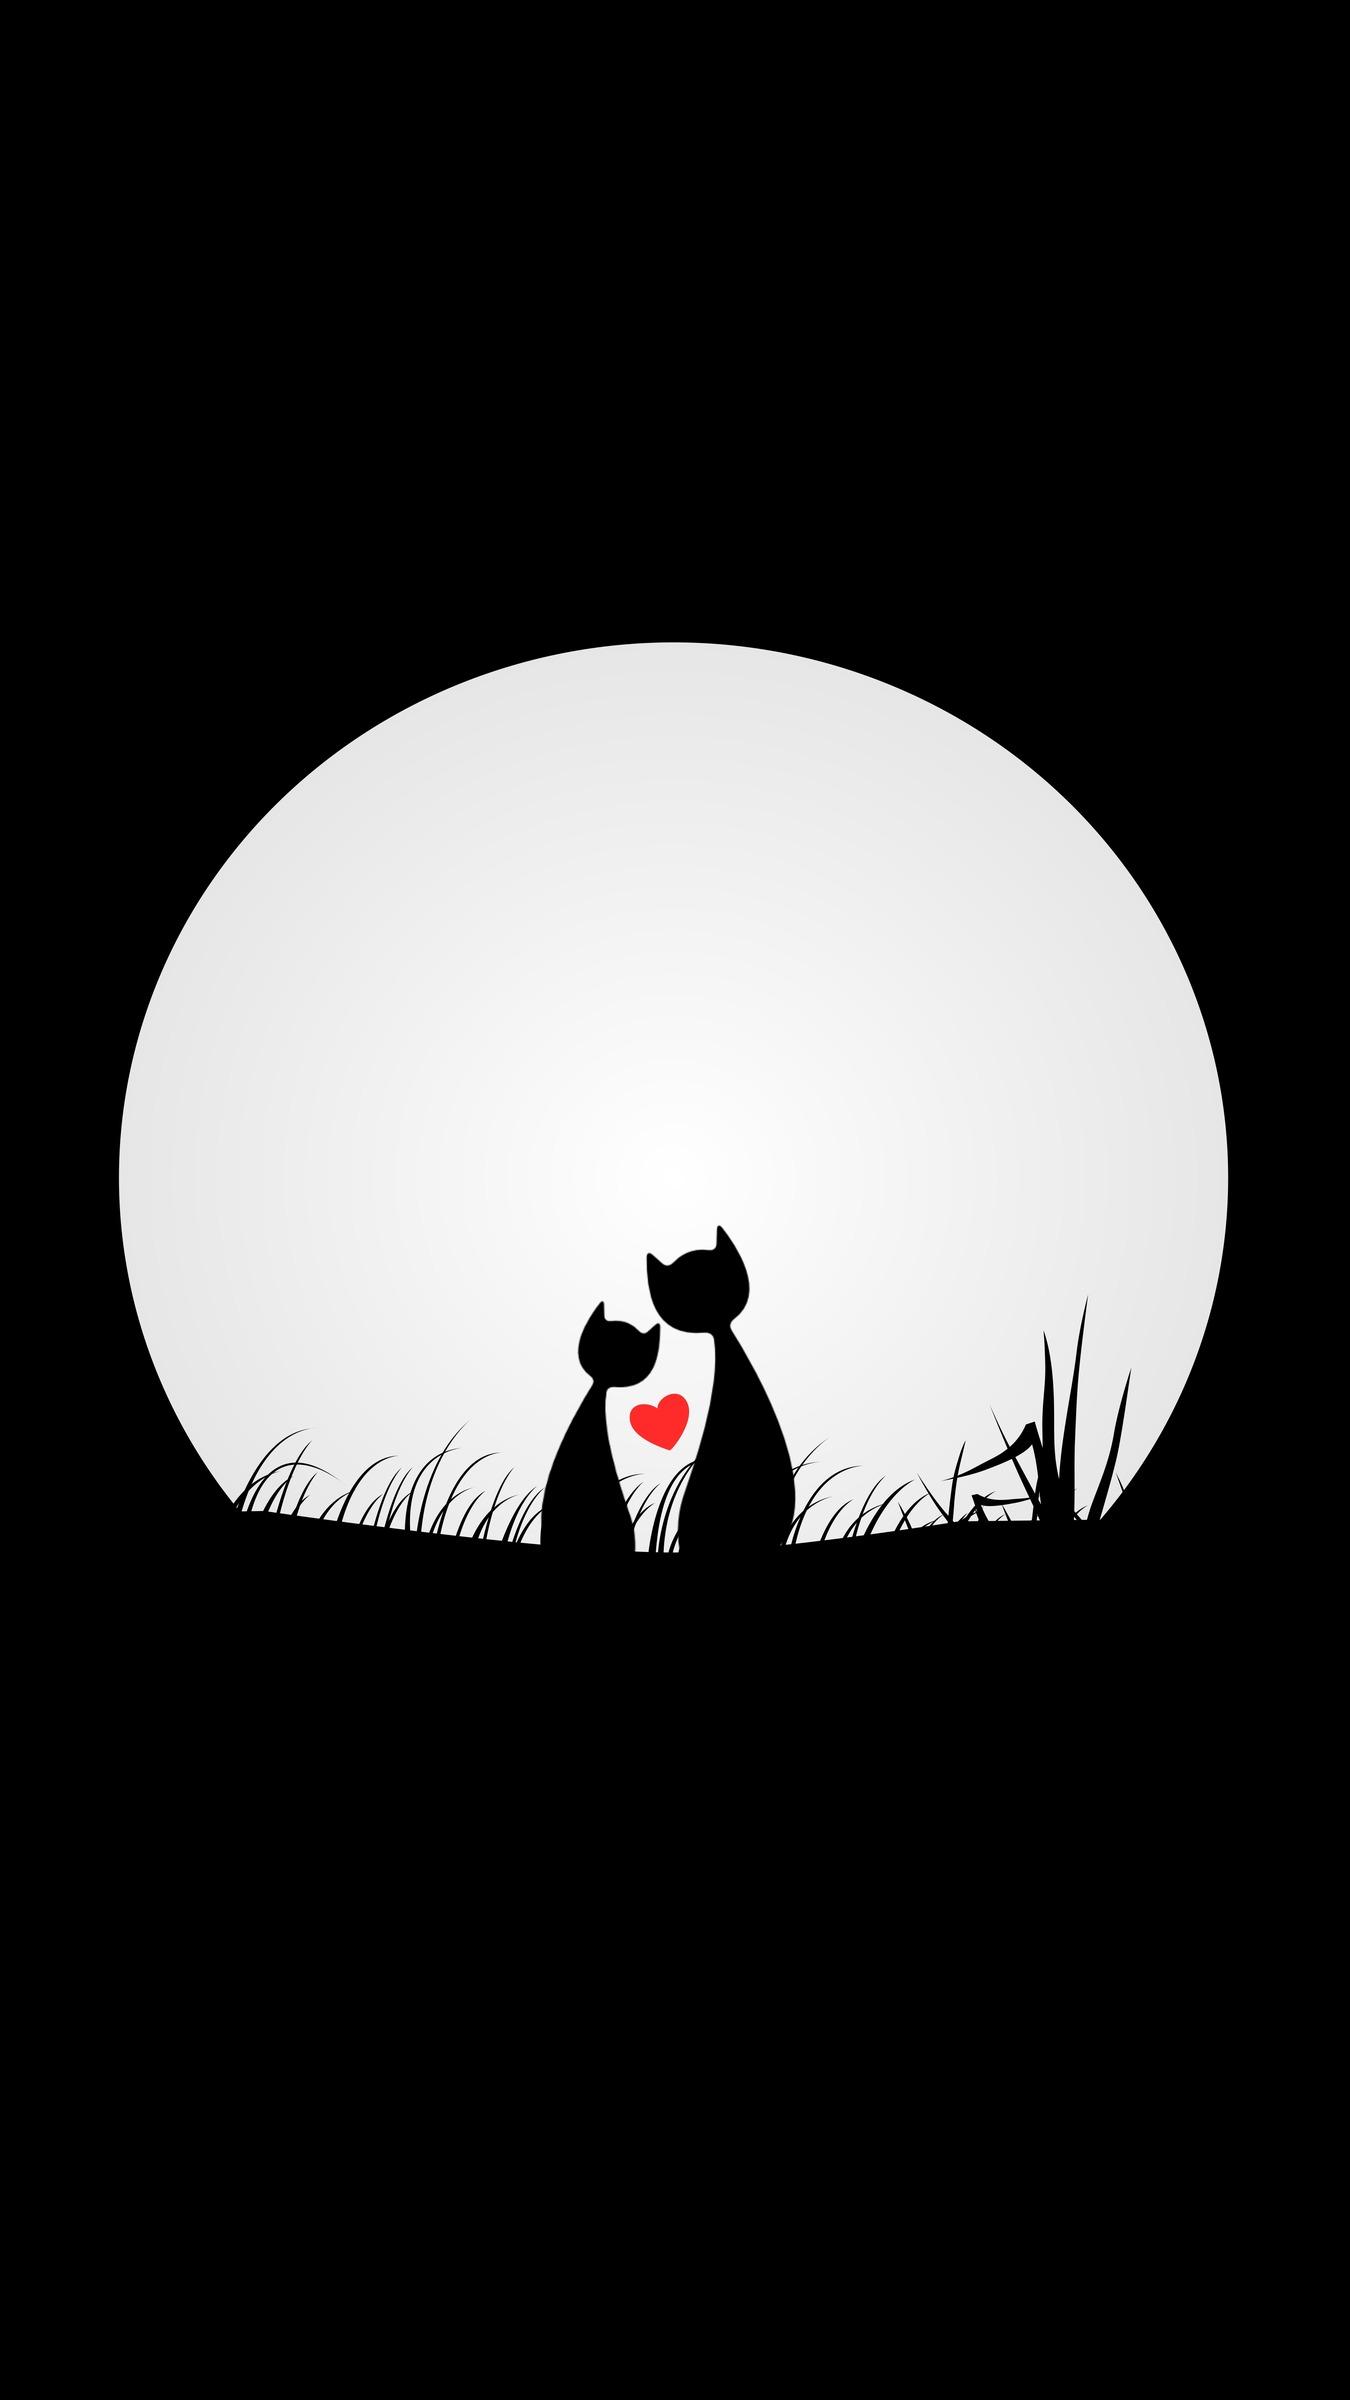 Download wallpaper 1350x2400 cats, love, silhouettes, night, moon